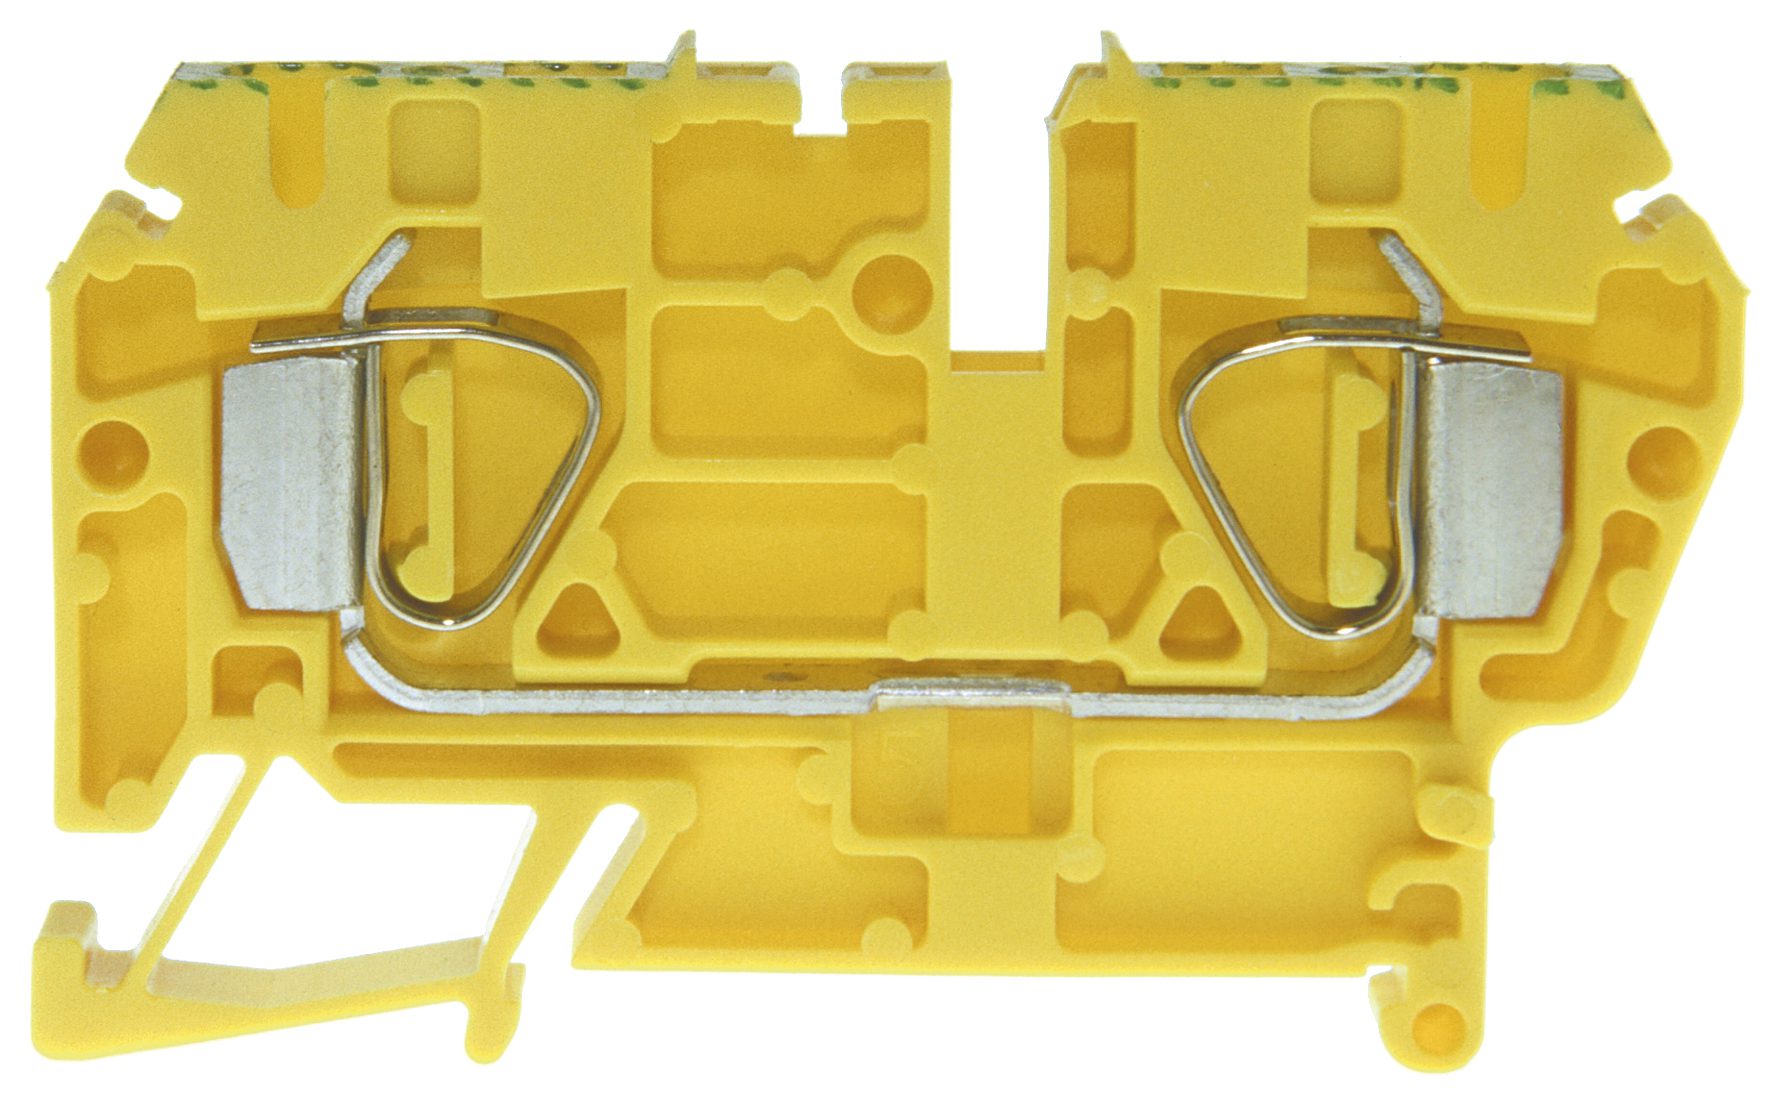 Tension clamp terminal DIN35 4mm² green/yellow